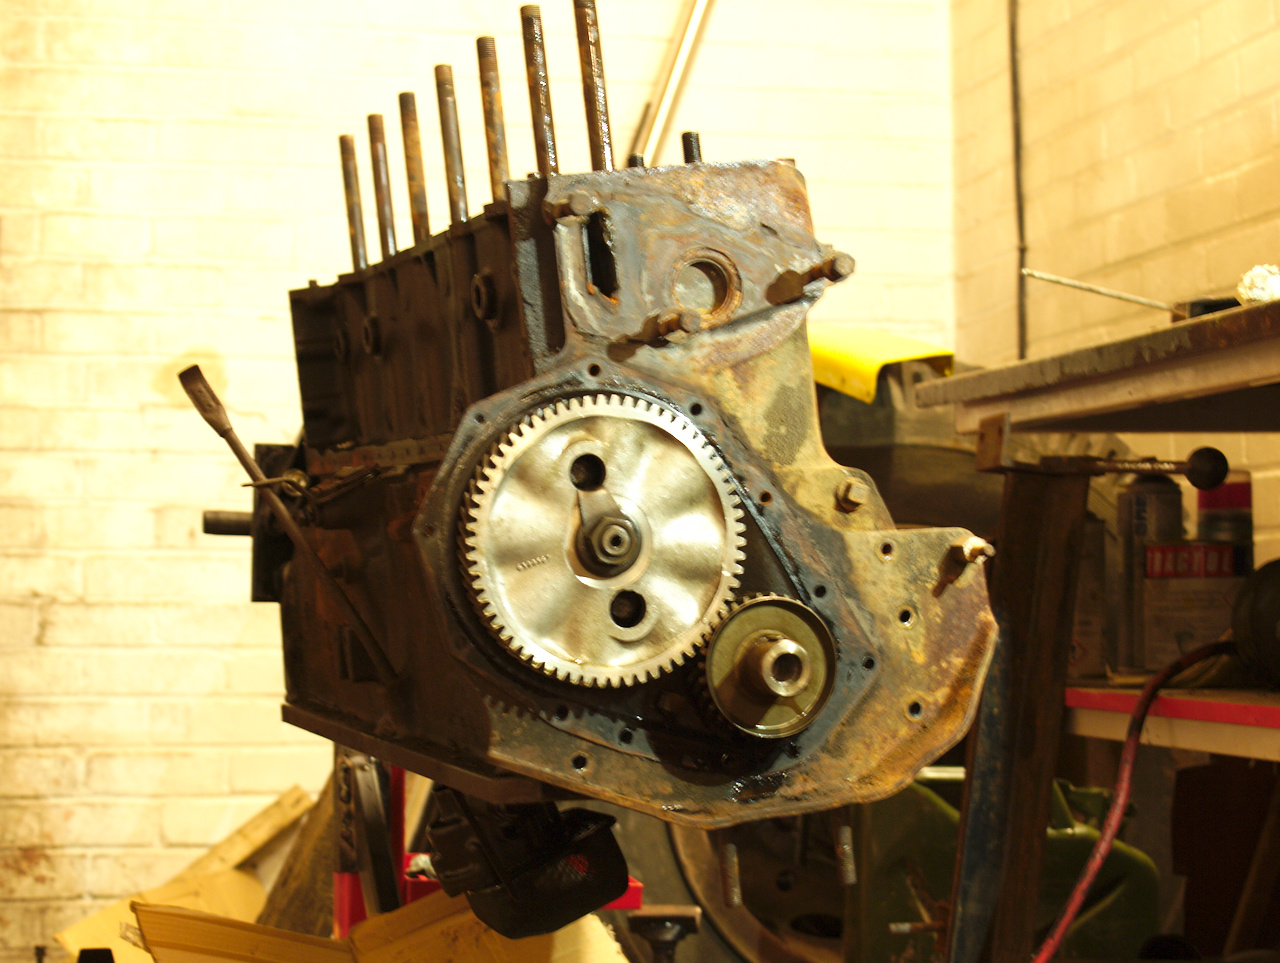 The partially-stripped engine on the stand, with the timing cover
removed and exposing the timing gears; with a large aluminium cam gear
meshed with the smaller crank gear.